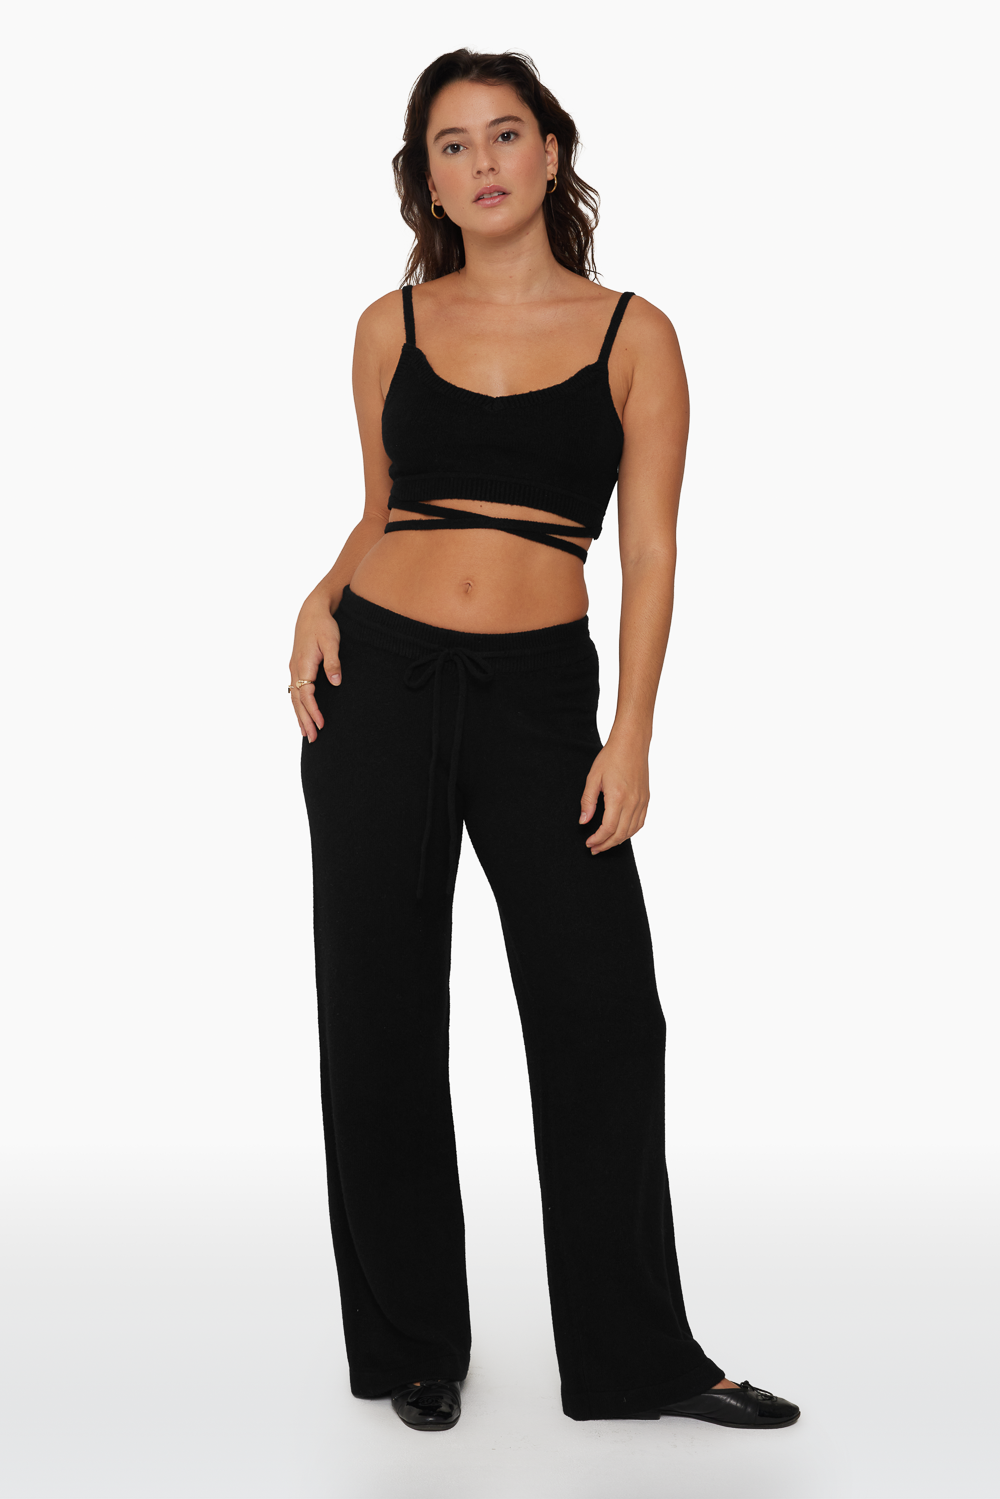 JERSEY KNIT RELAXED KNIT PANTS - ONYX